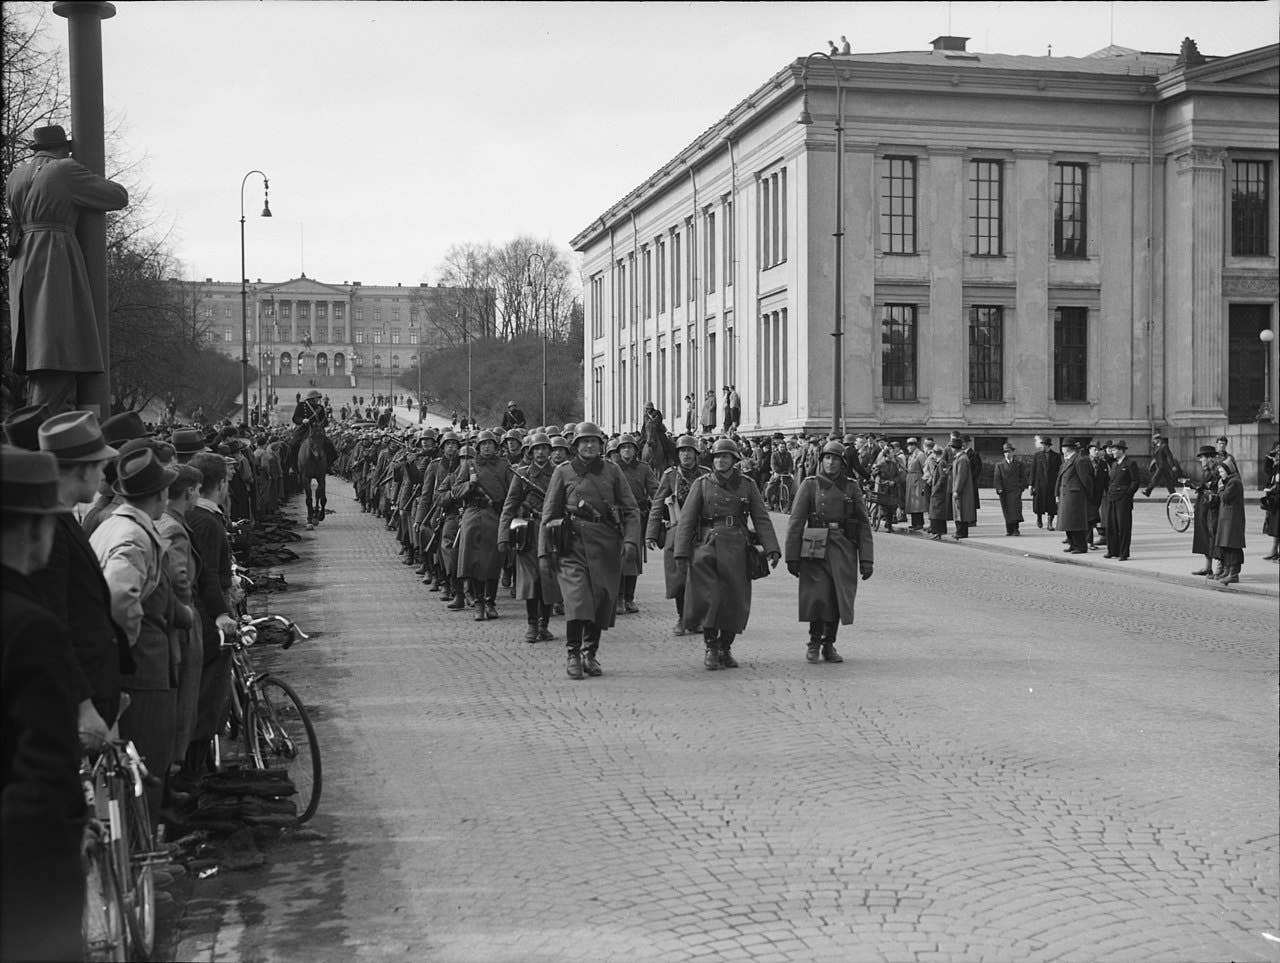 German soldiers marching through Oslo on 9 April 1940. (Wikimedia Commons)